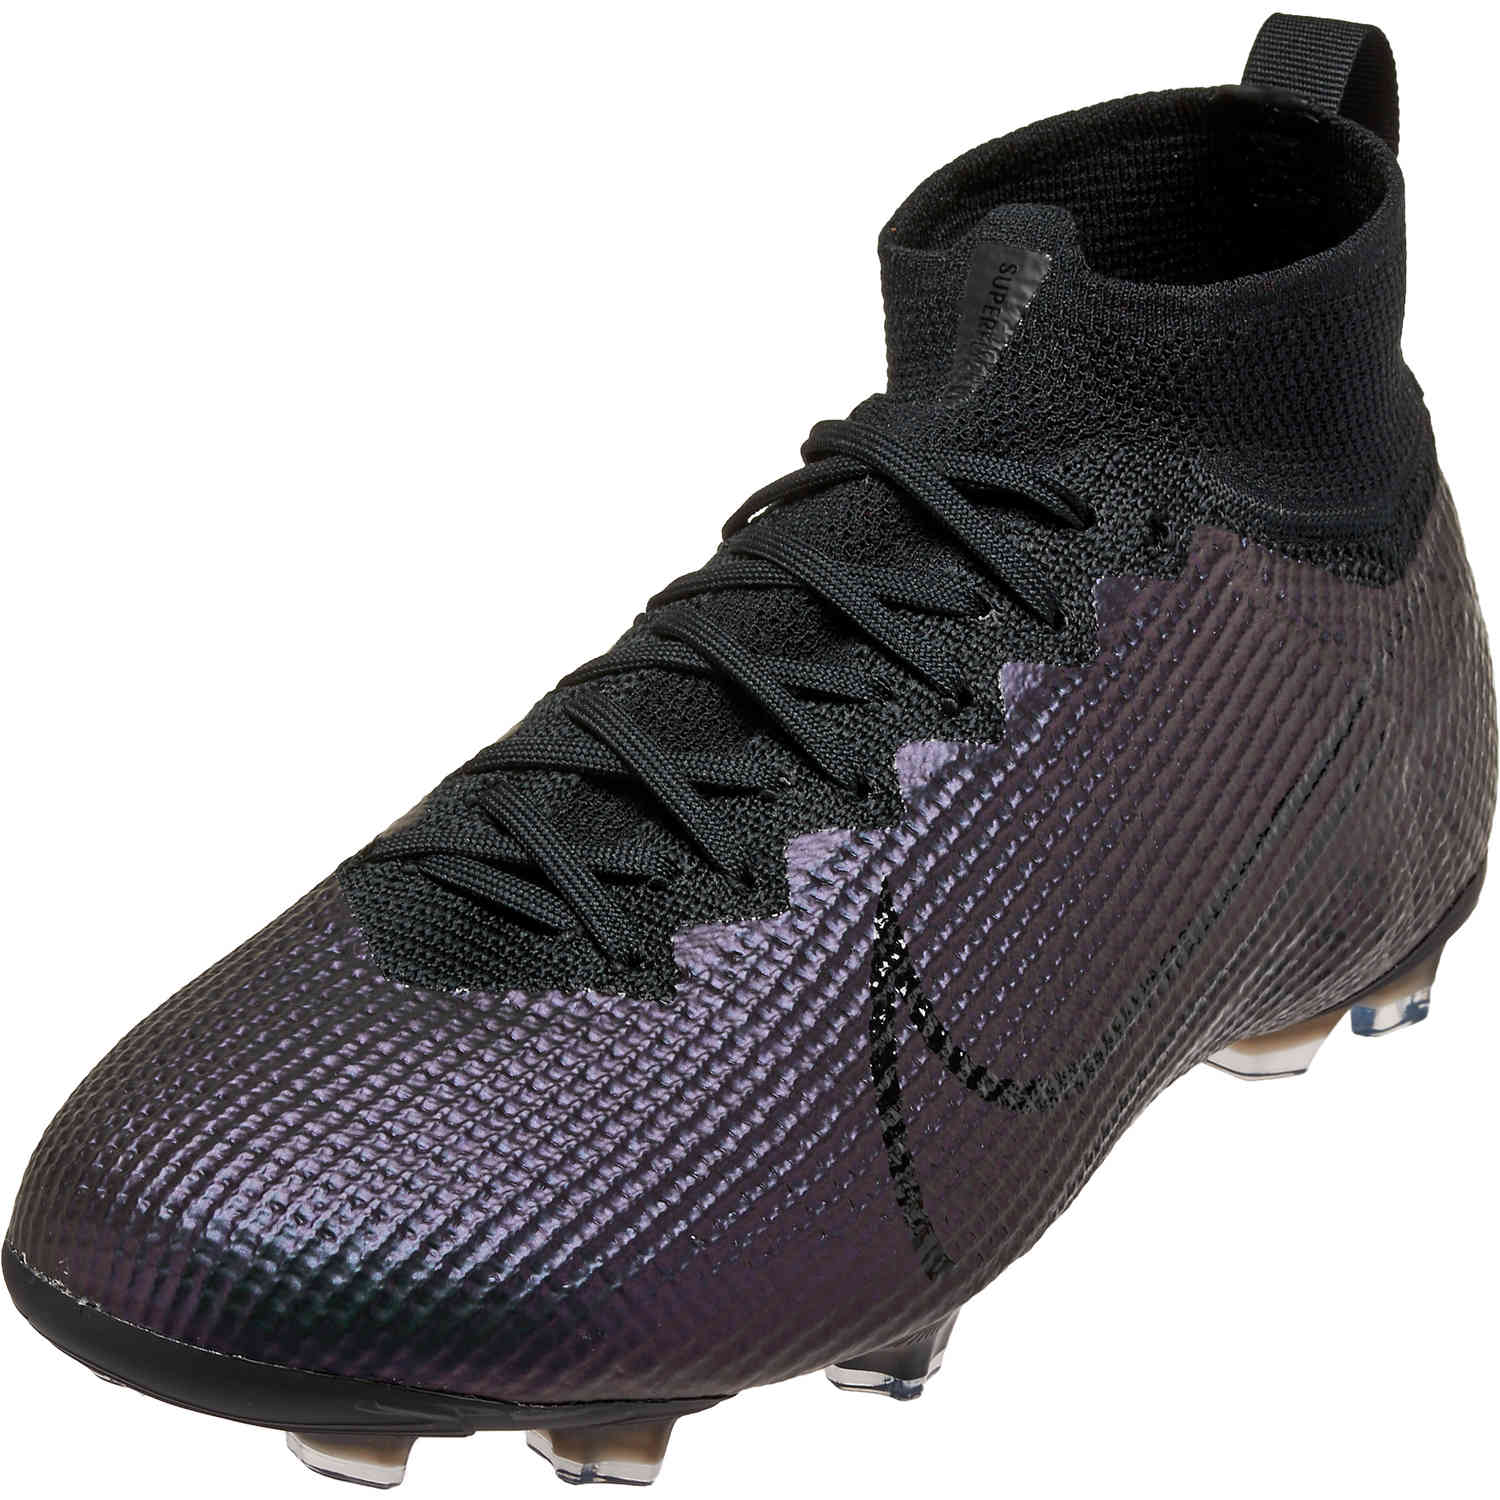 Nike Mercurial Superfly 7 Academy MDS FG Soccer Cleats.